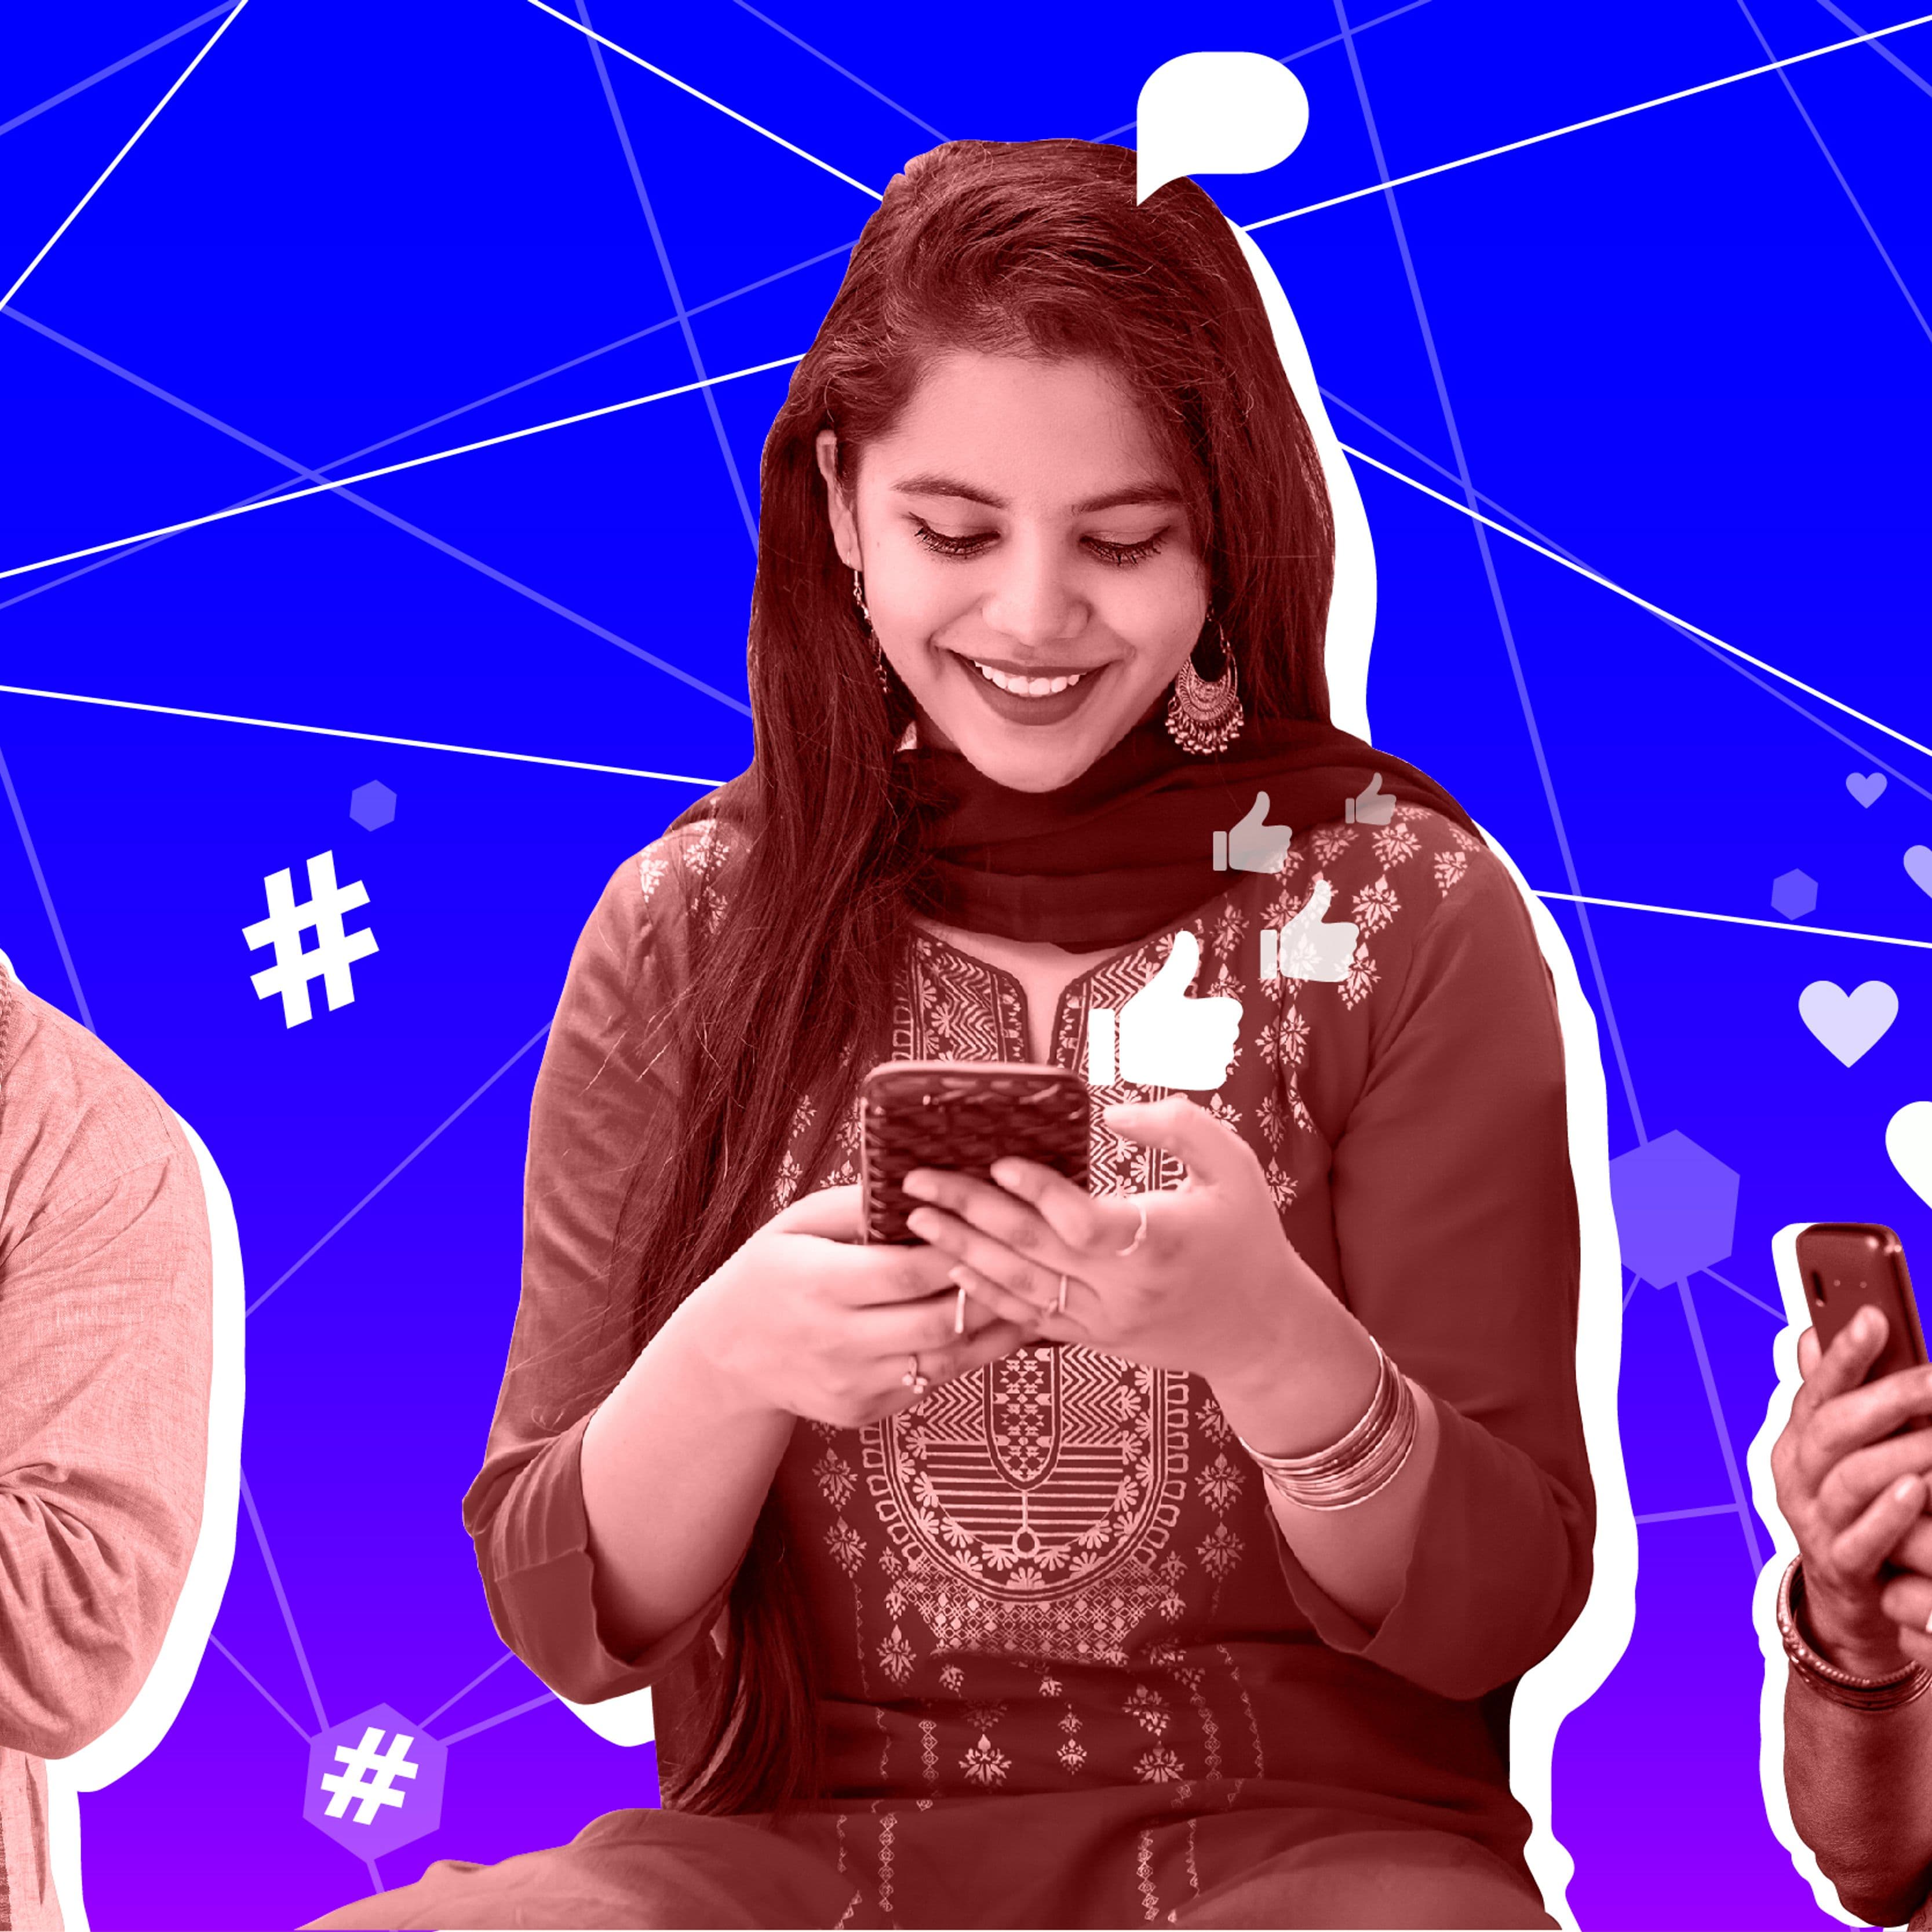 Two-thirds of consumers in India find user-generated content to be as entertaining as traditional media: Accenture report